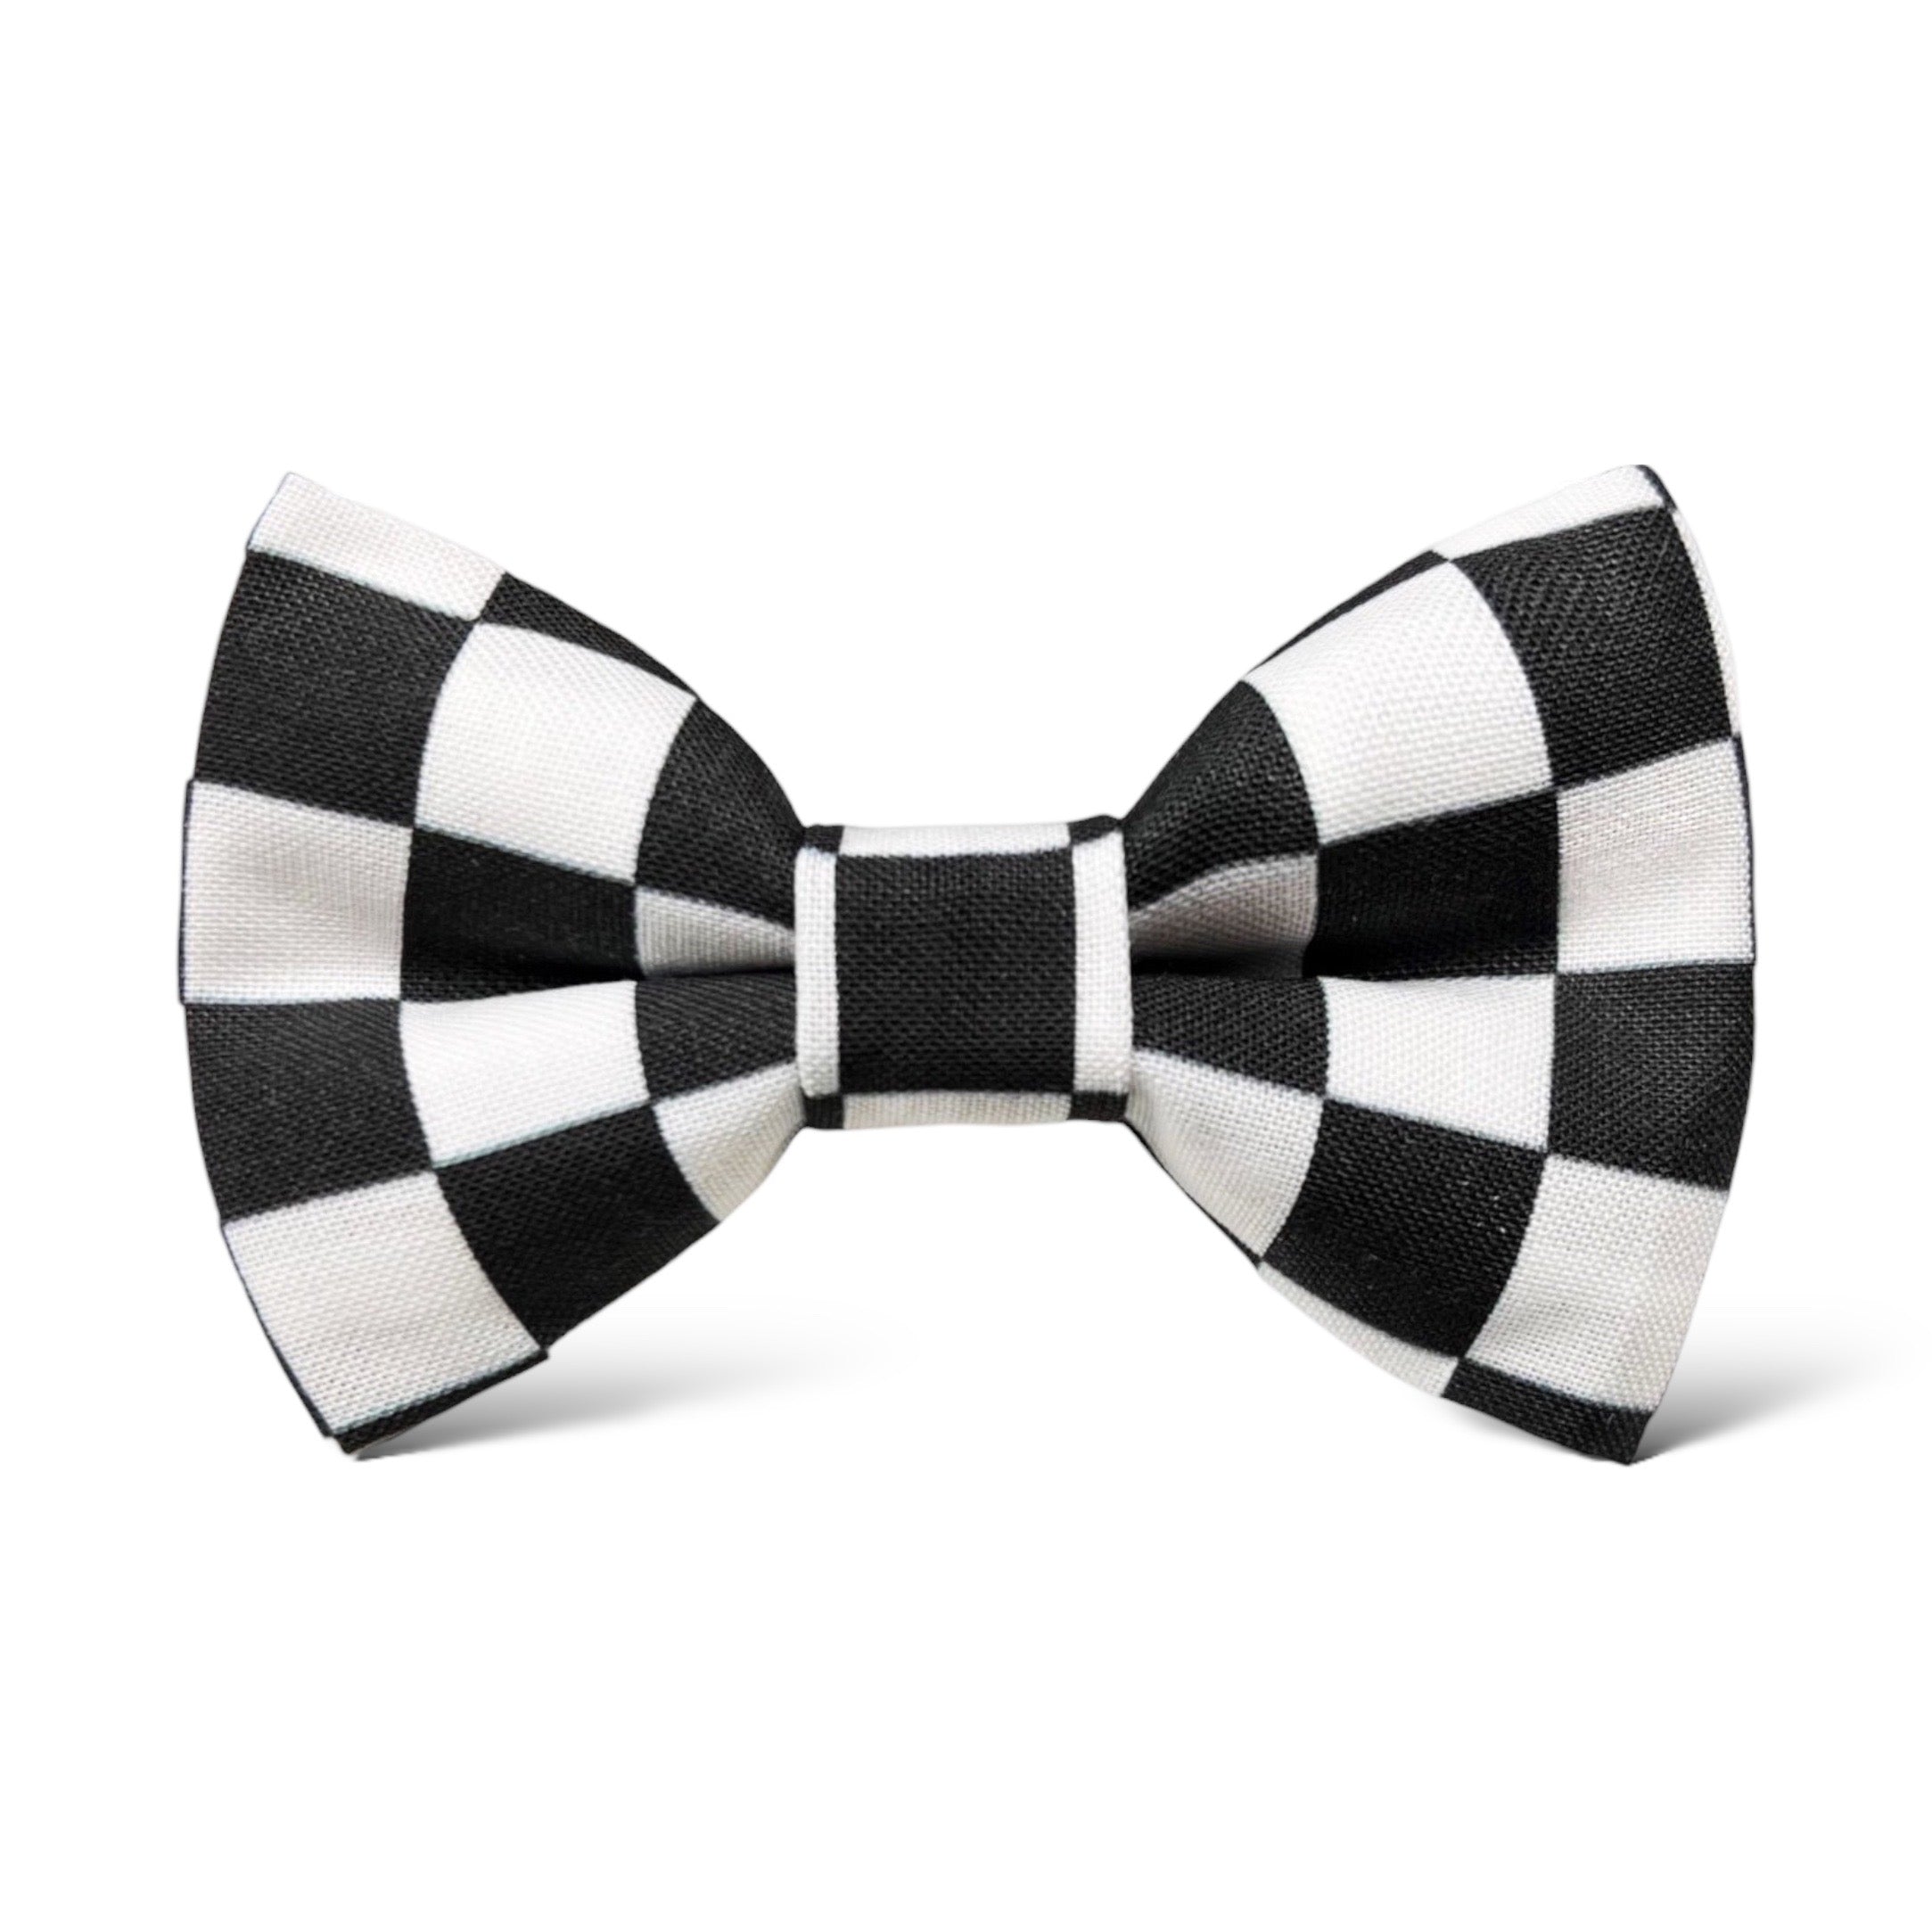 Checkered Flag Bow Tie